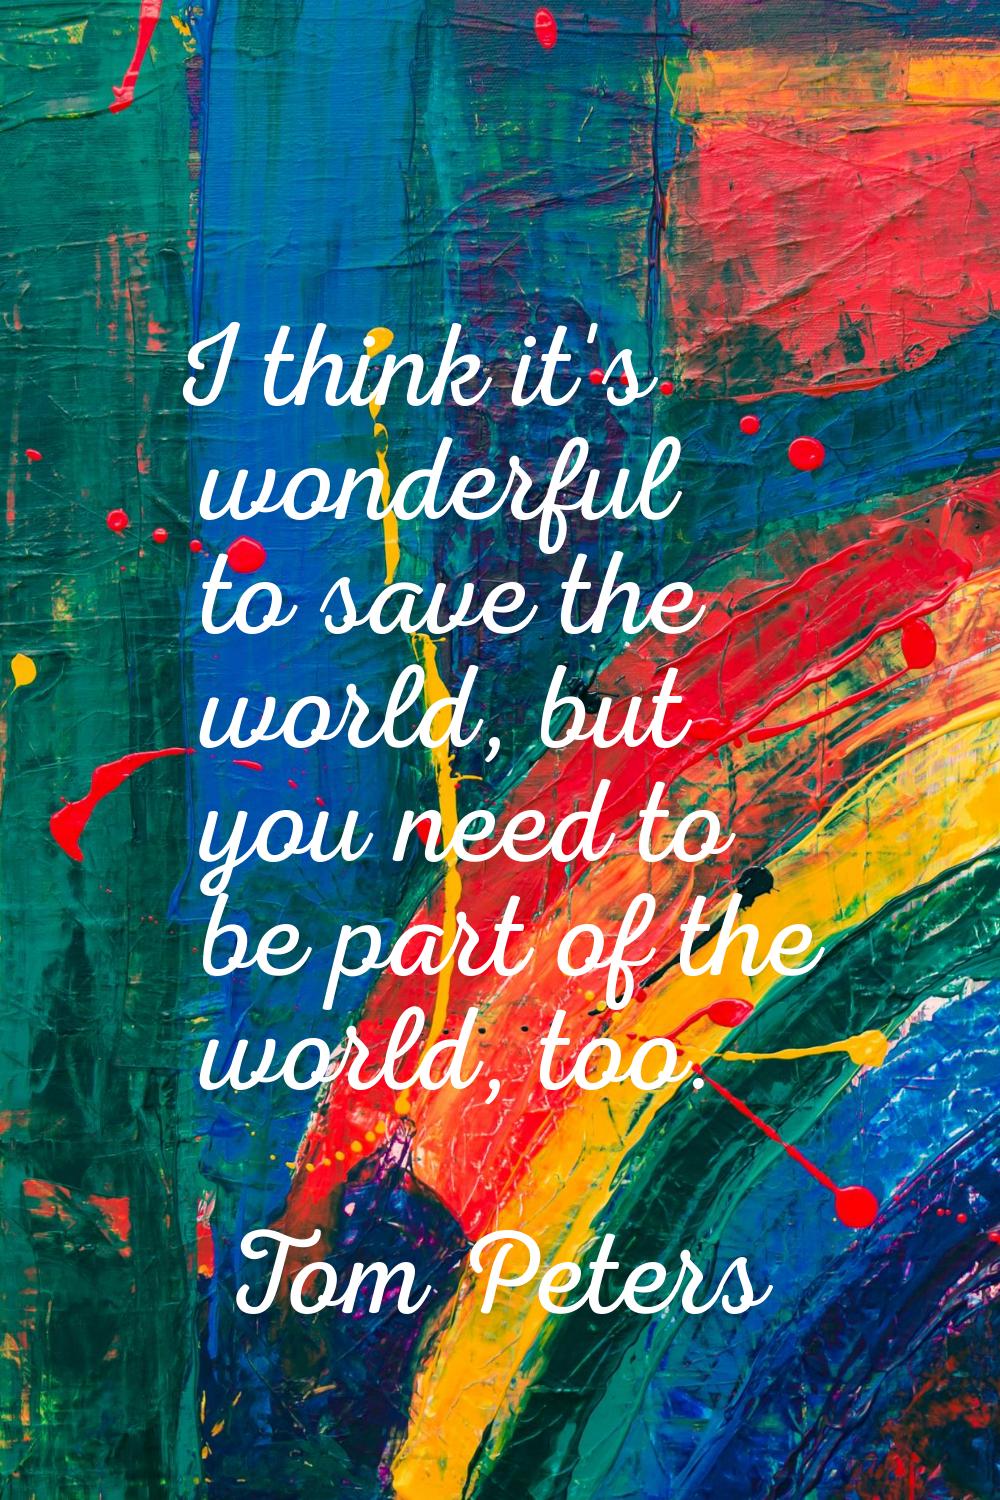 I think it's wonderful to save the world, but you need to be part of the world, too.